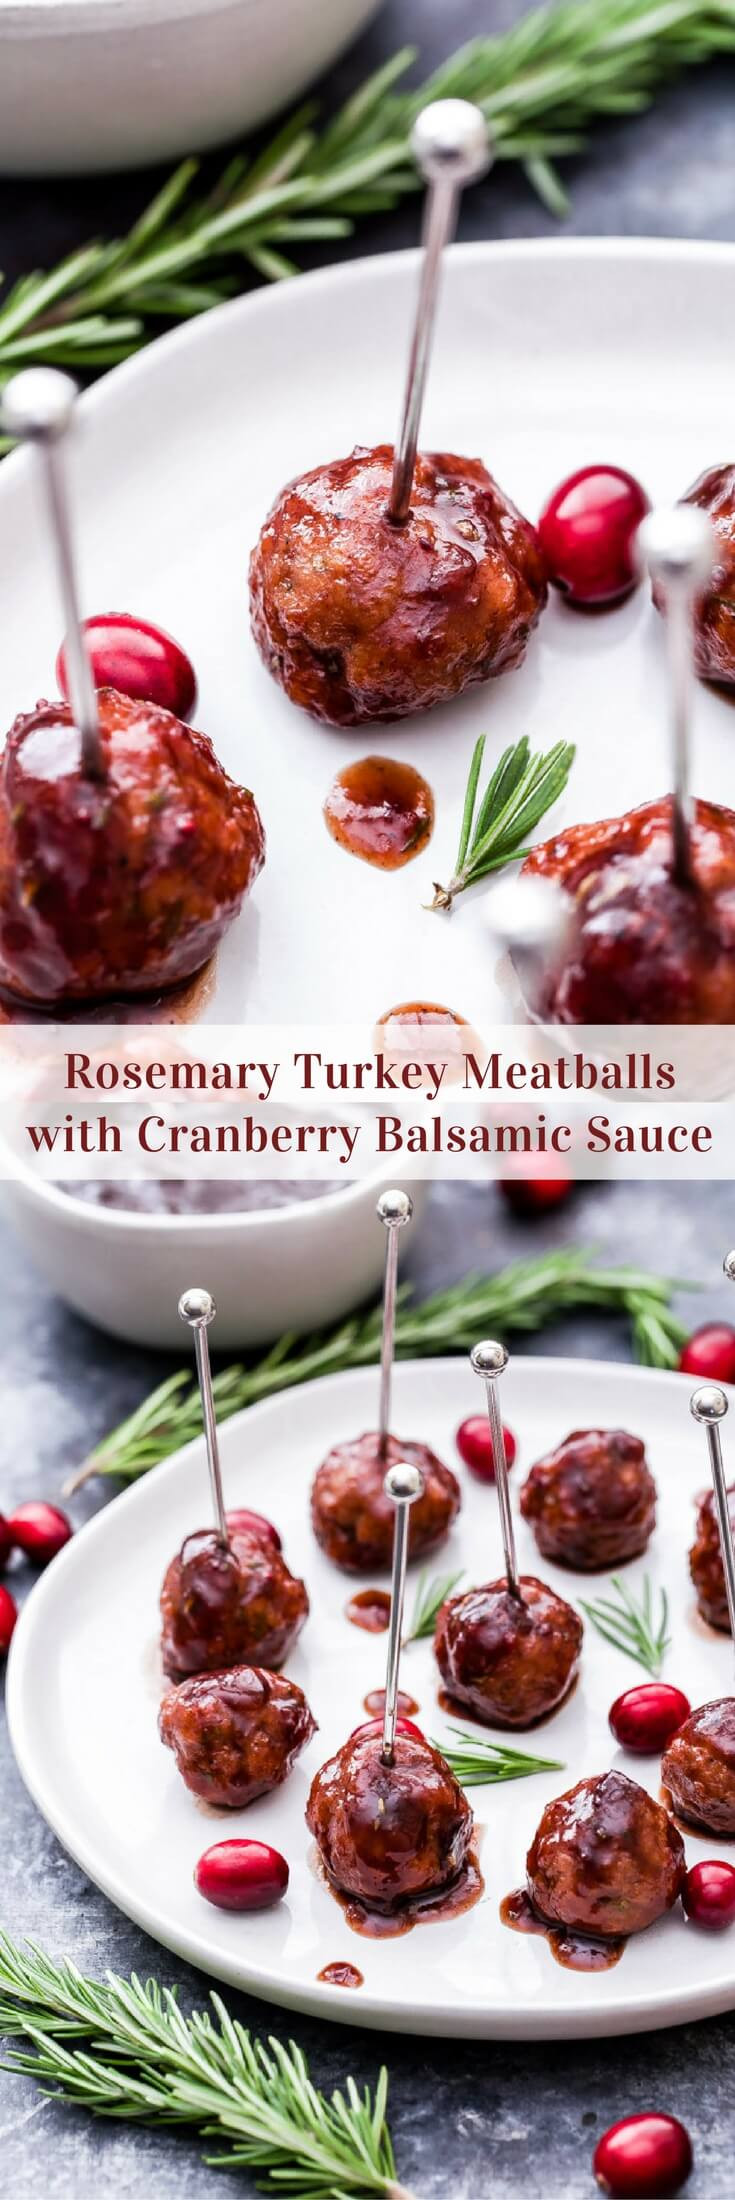 Turkey Meatballs Appetizers
 Rosemary Turkey Meatballs with Cranberry Balsamic Sauce